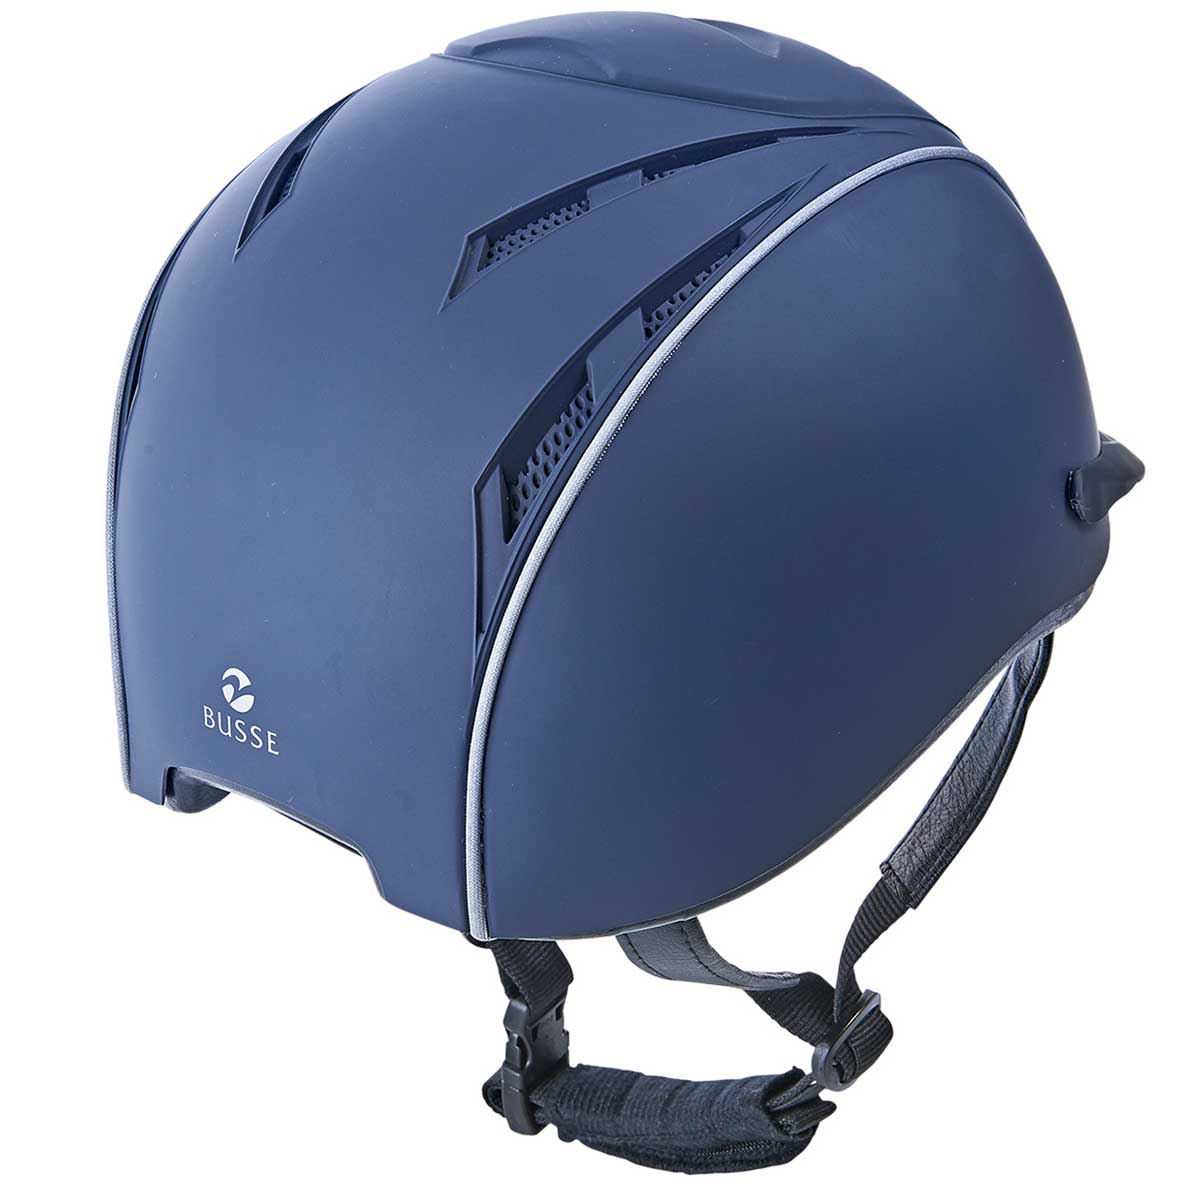 BUSSE Riding Helmet TOULOUSE navy (silver) S